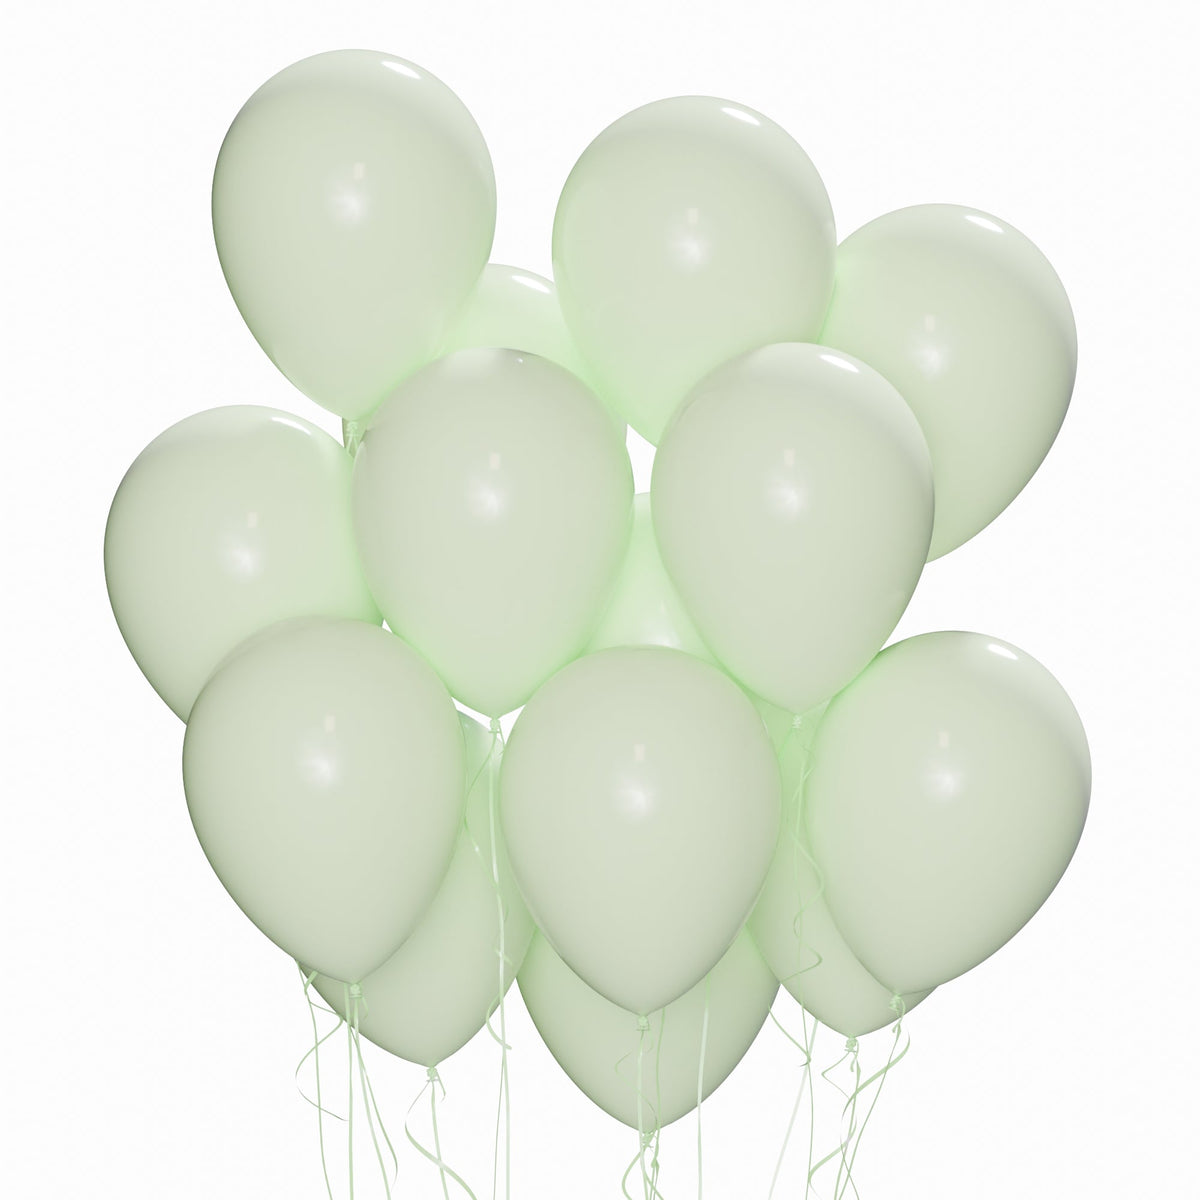 WIDE OCEAN INTERNATIONAL TRADE BEIJING CO., LTD Balloons Green Latex Balloon 12 Inches, Macaroon Collection, 15 Count 810064198922